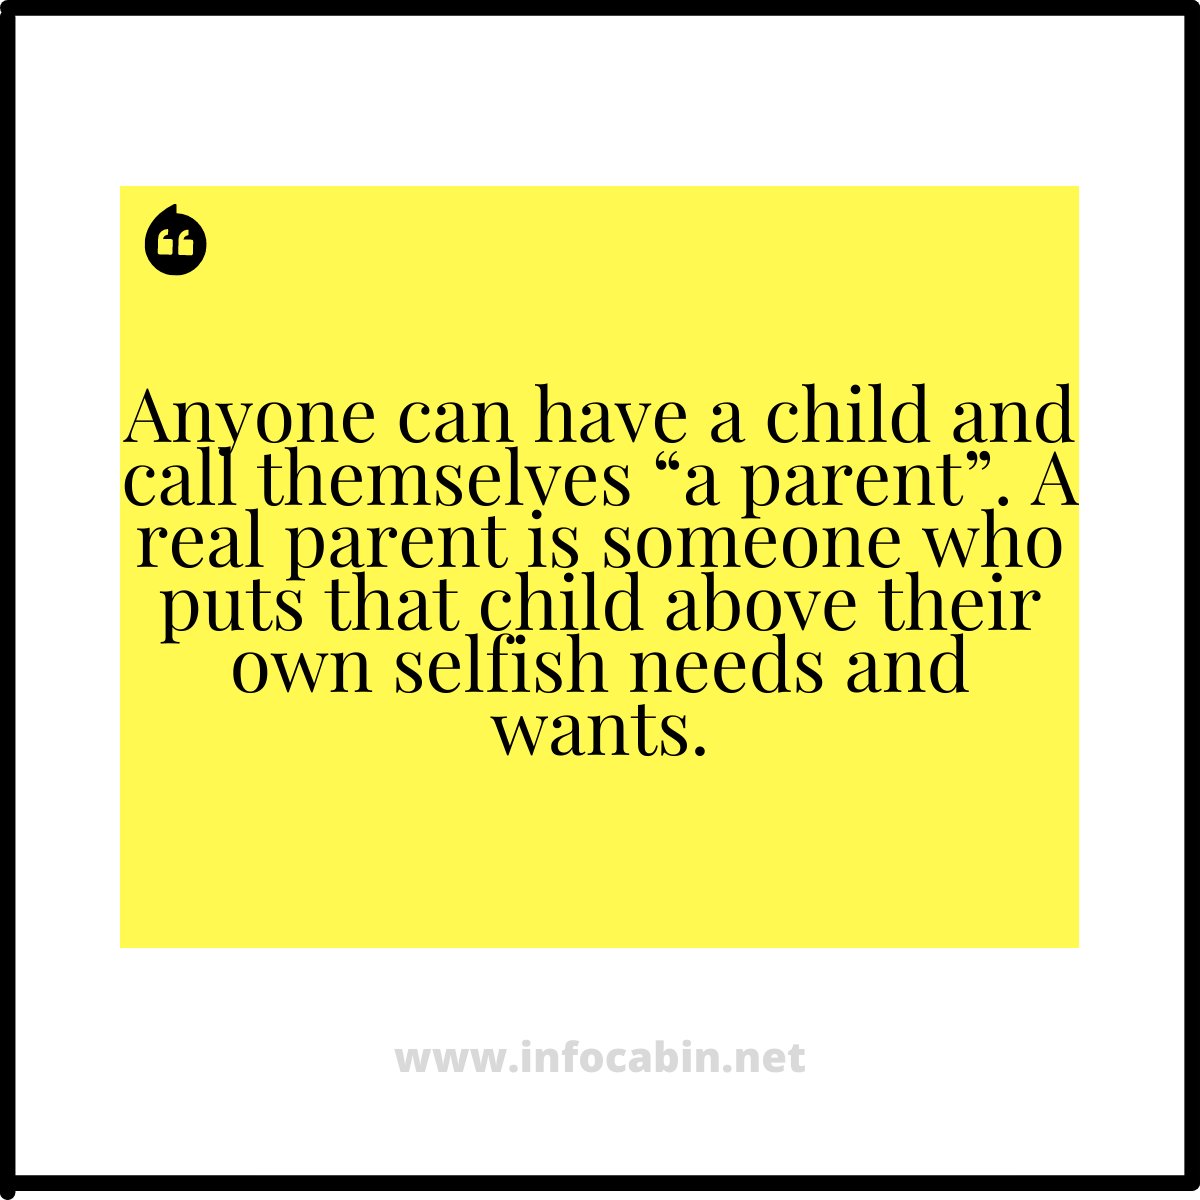 Anyone can have a child and call themselves “a parent”. A real parent is someone who puts that child above their own selfish needs and wants.